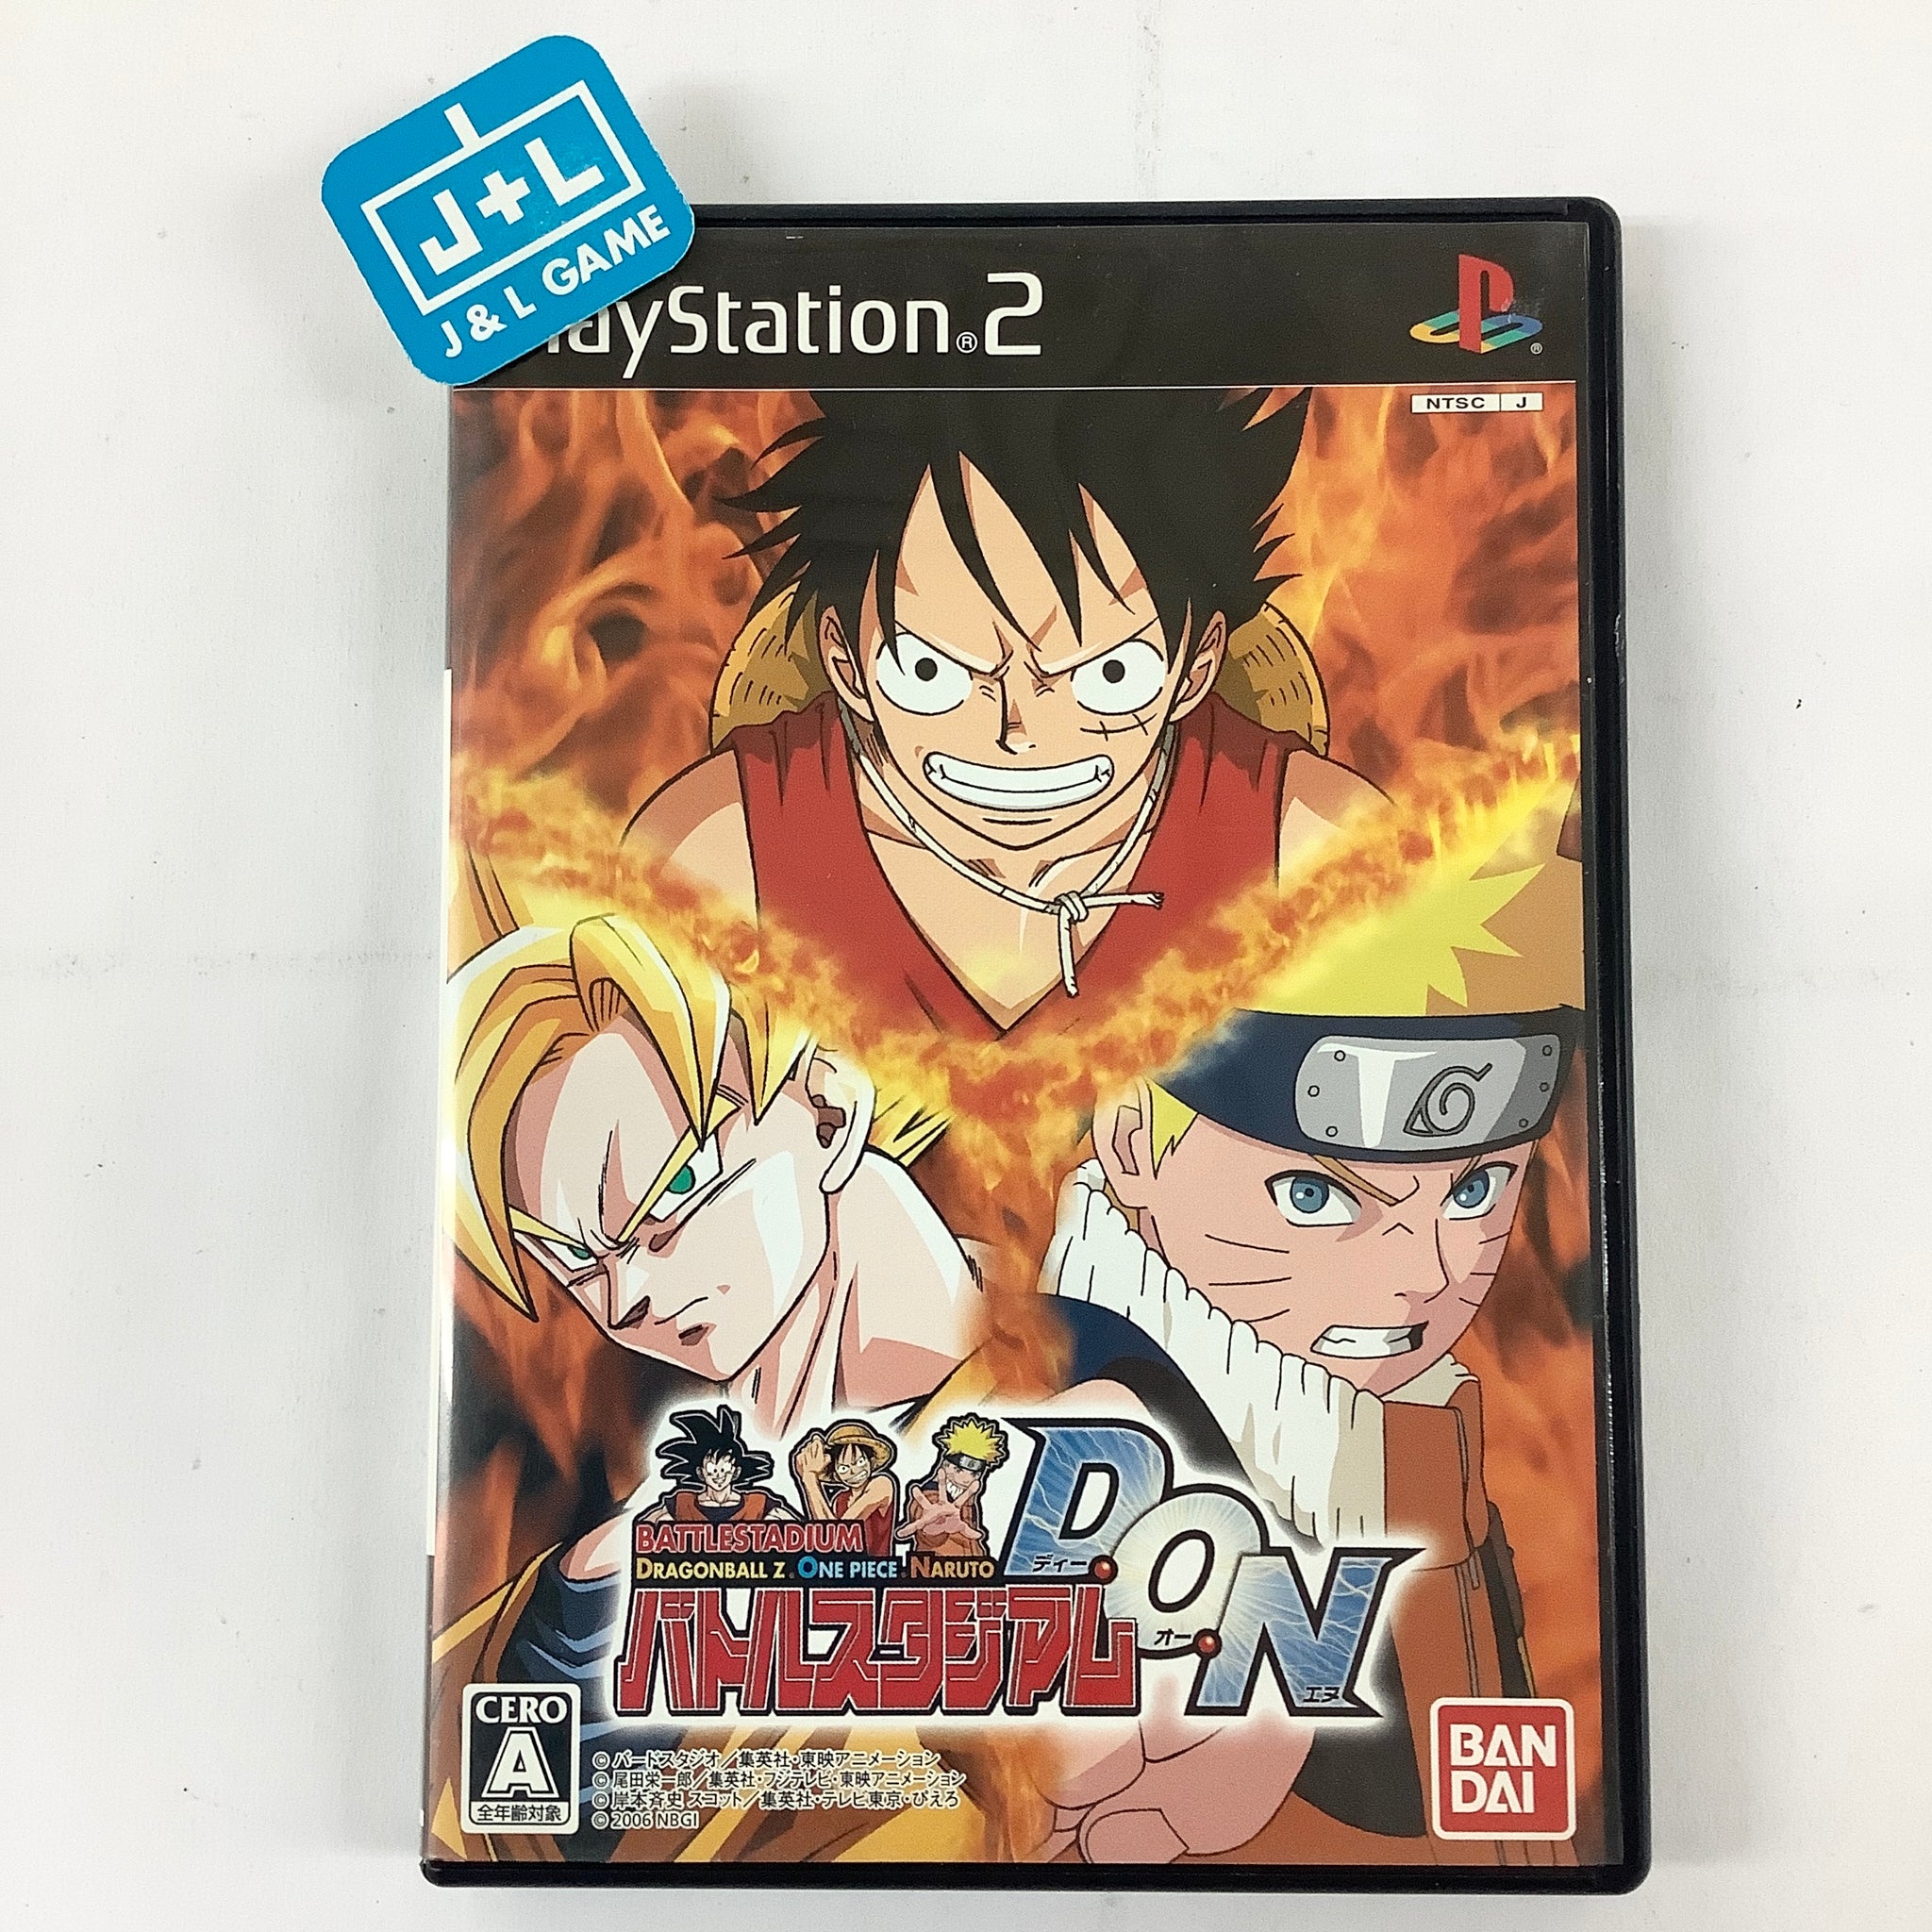 Dragon Ball Z 3 - (PS2) PlayStation 2 [Pre-Owned] (Japanese Import